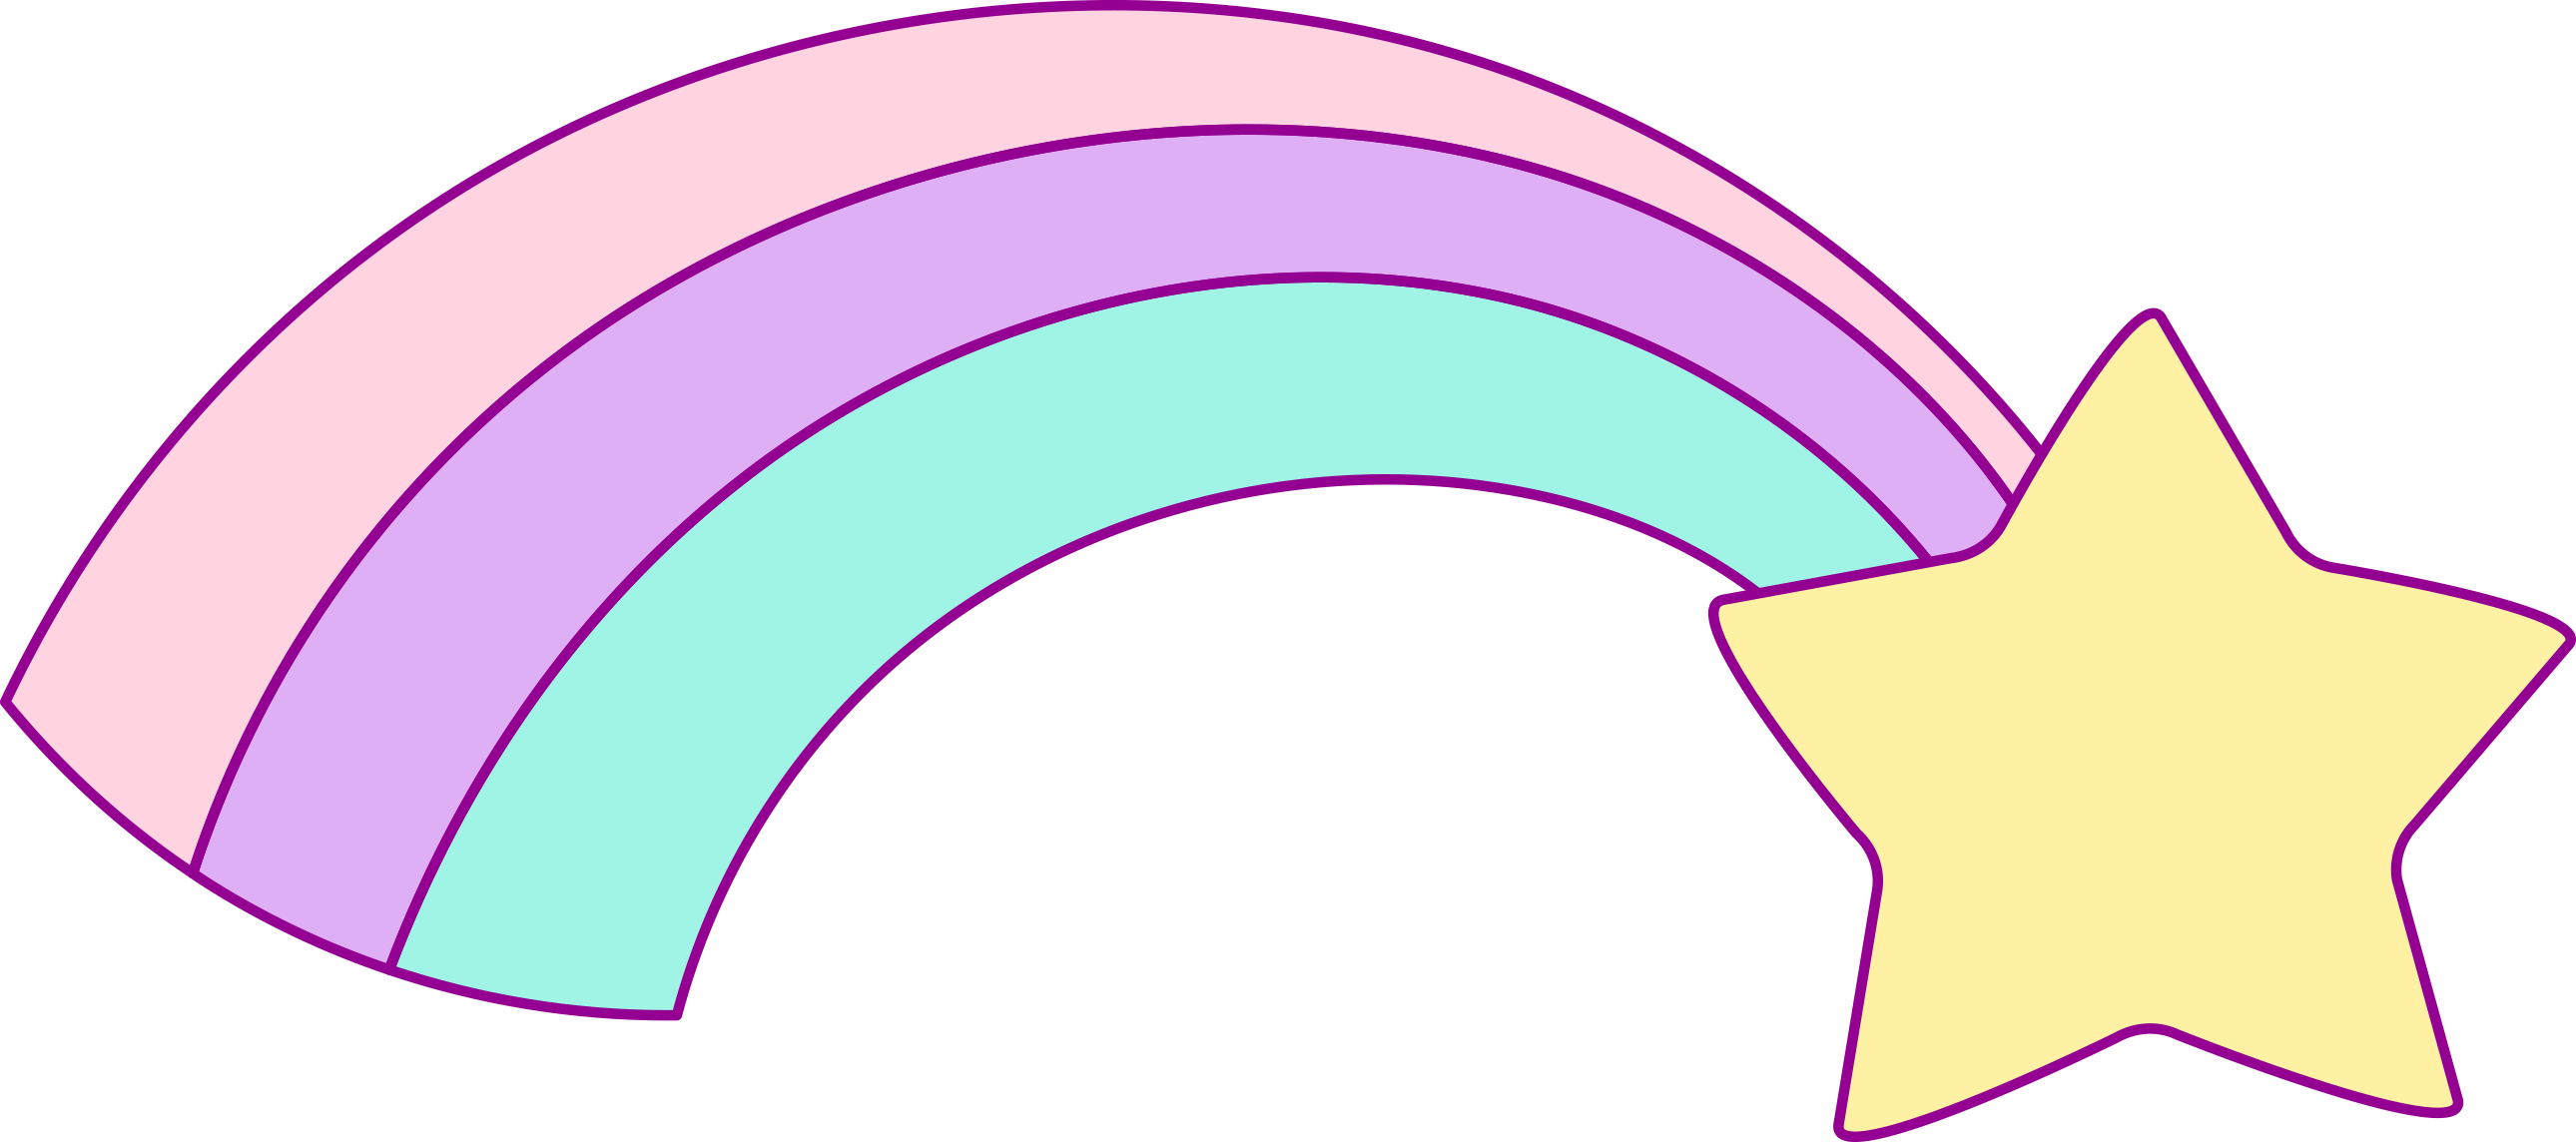 Baby at getdrawings com. Clipart eye unicorn